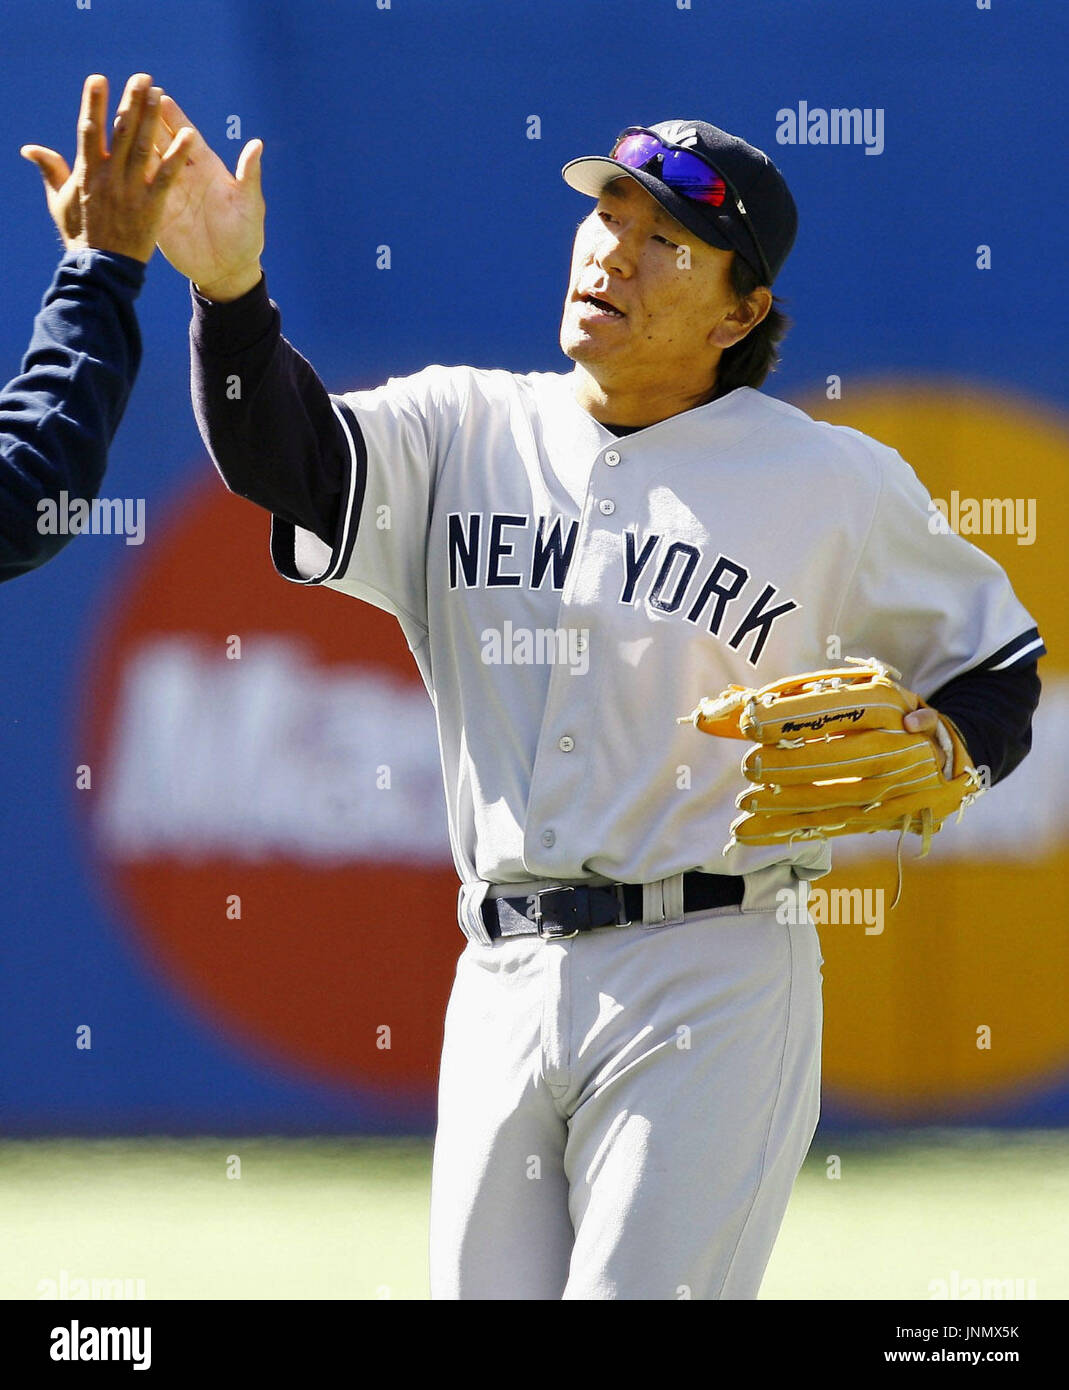 TORONTO, Canada - New York Yankees outfielder Hideki Matsui joins his teammate in celebration after the team's 3-1 win over the Toronto Blue Jays at Rogers Centre on April 19. (MLB) (Kyodo) Stock Photo